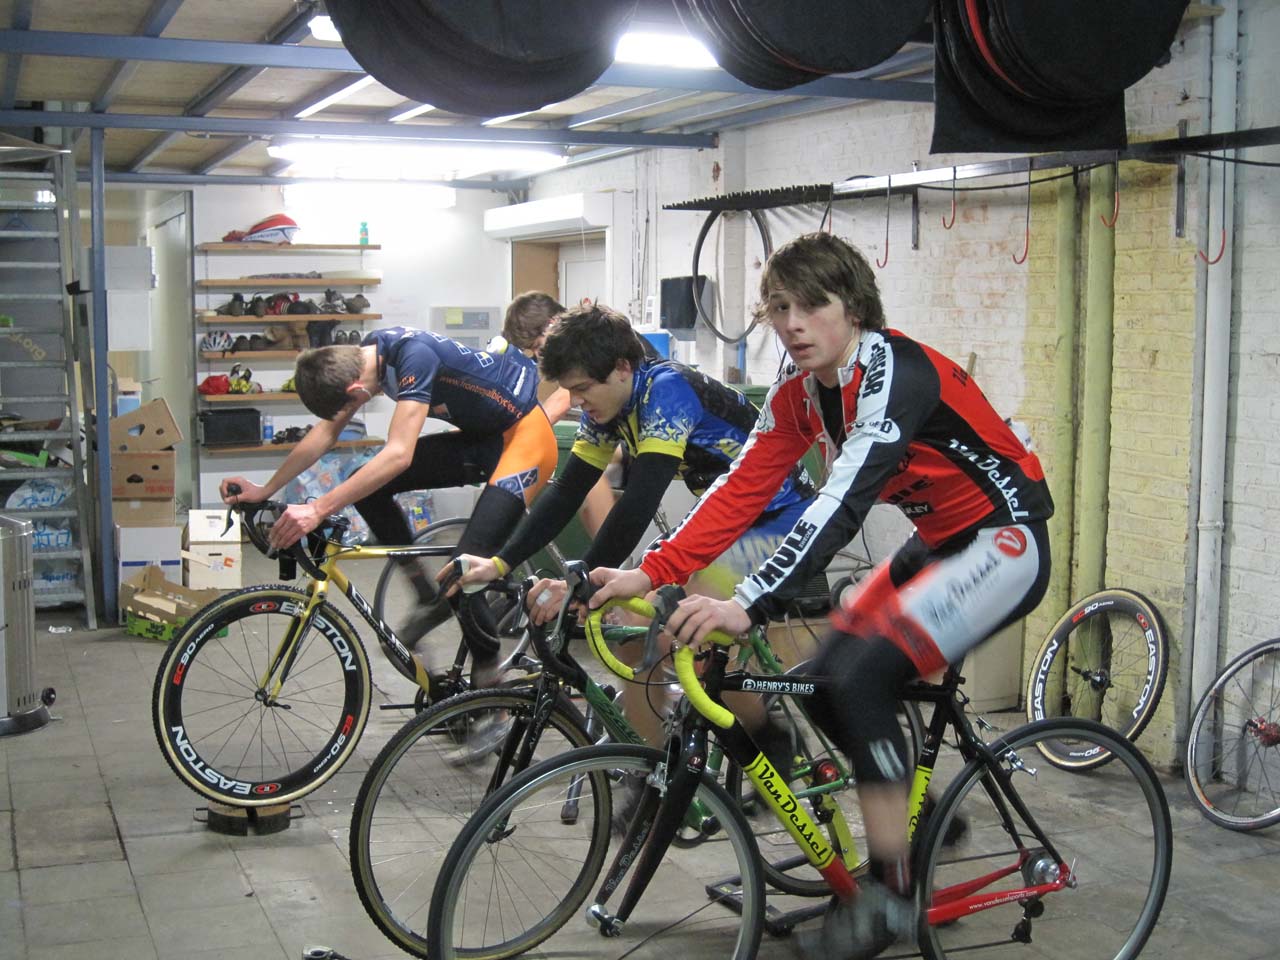 The riders do their best to train in spite of the weather. ? Nathan Phillips